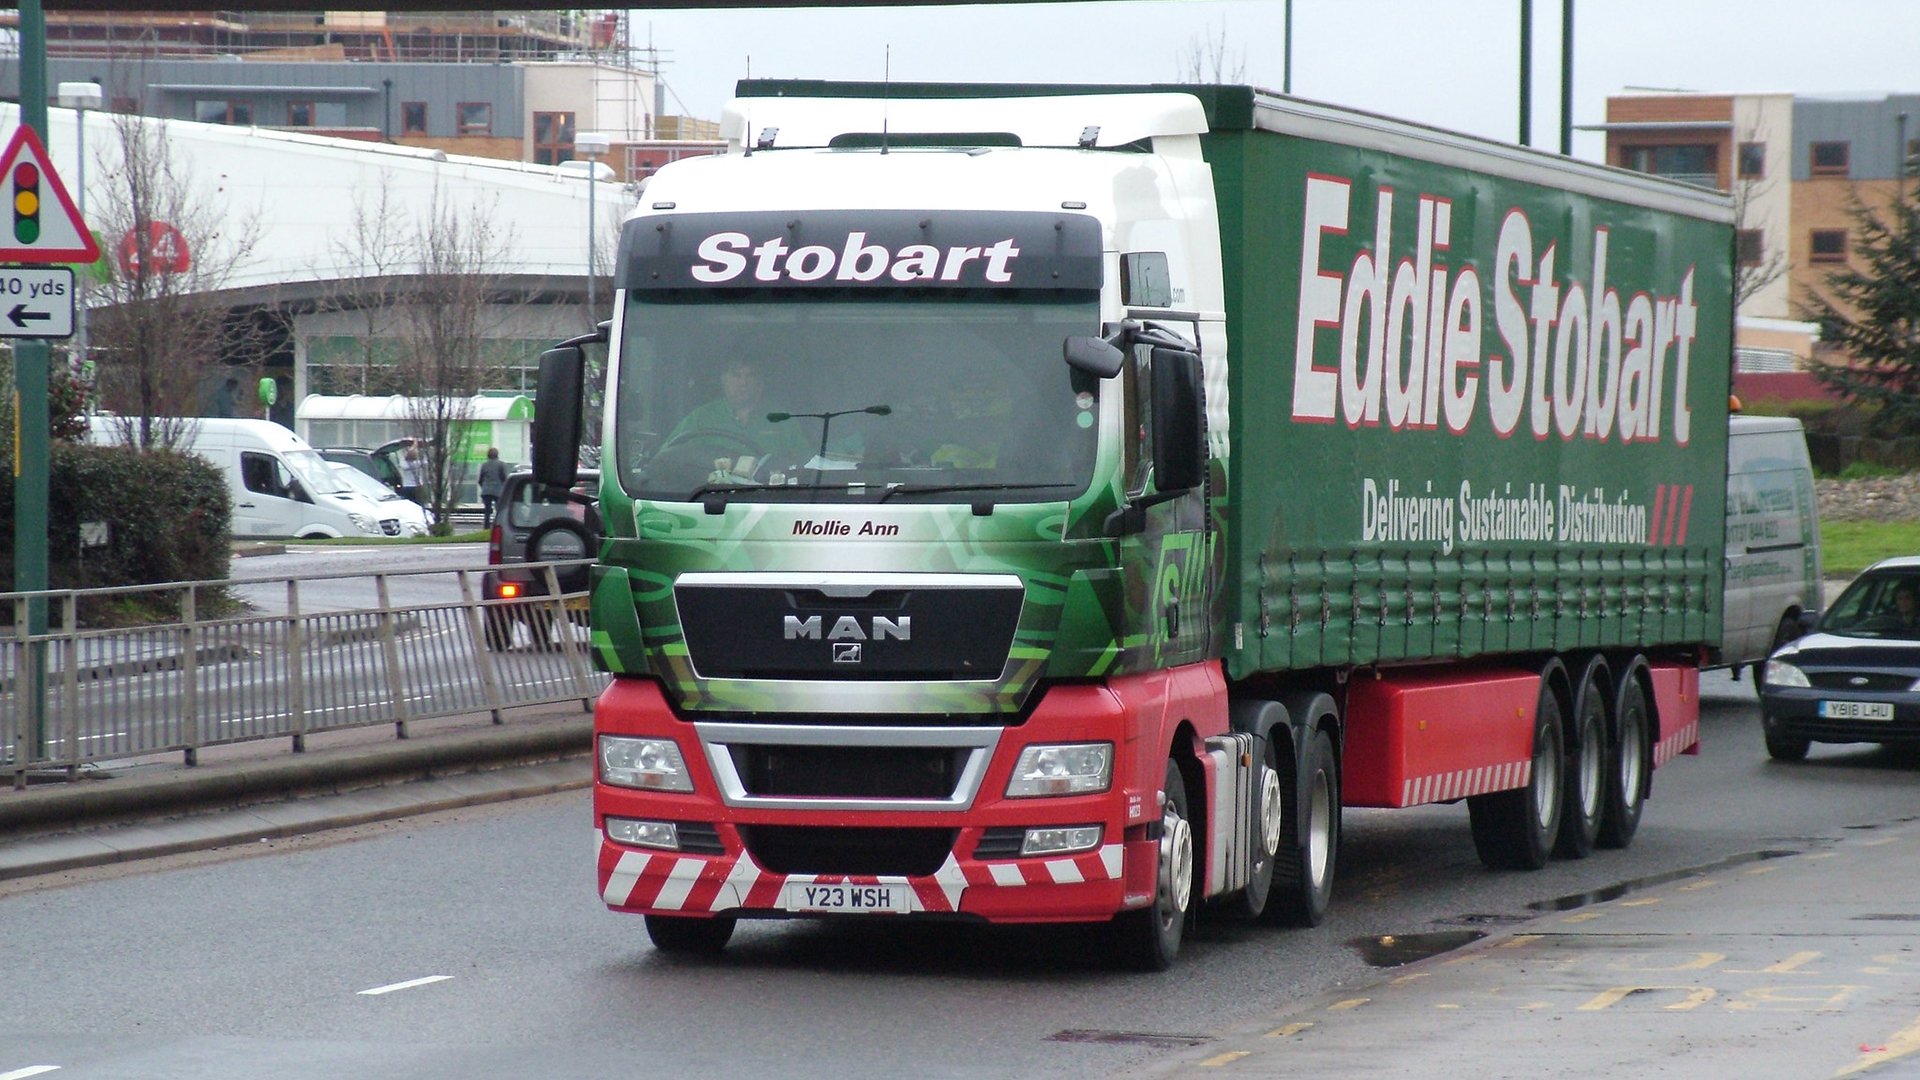 How to name an Eddie Stobart after someone | AutoTrader